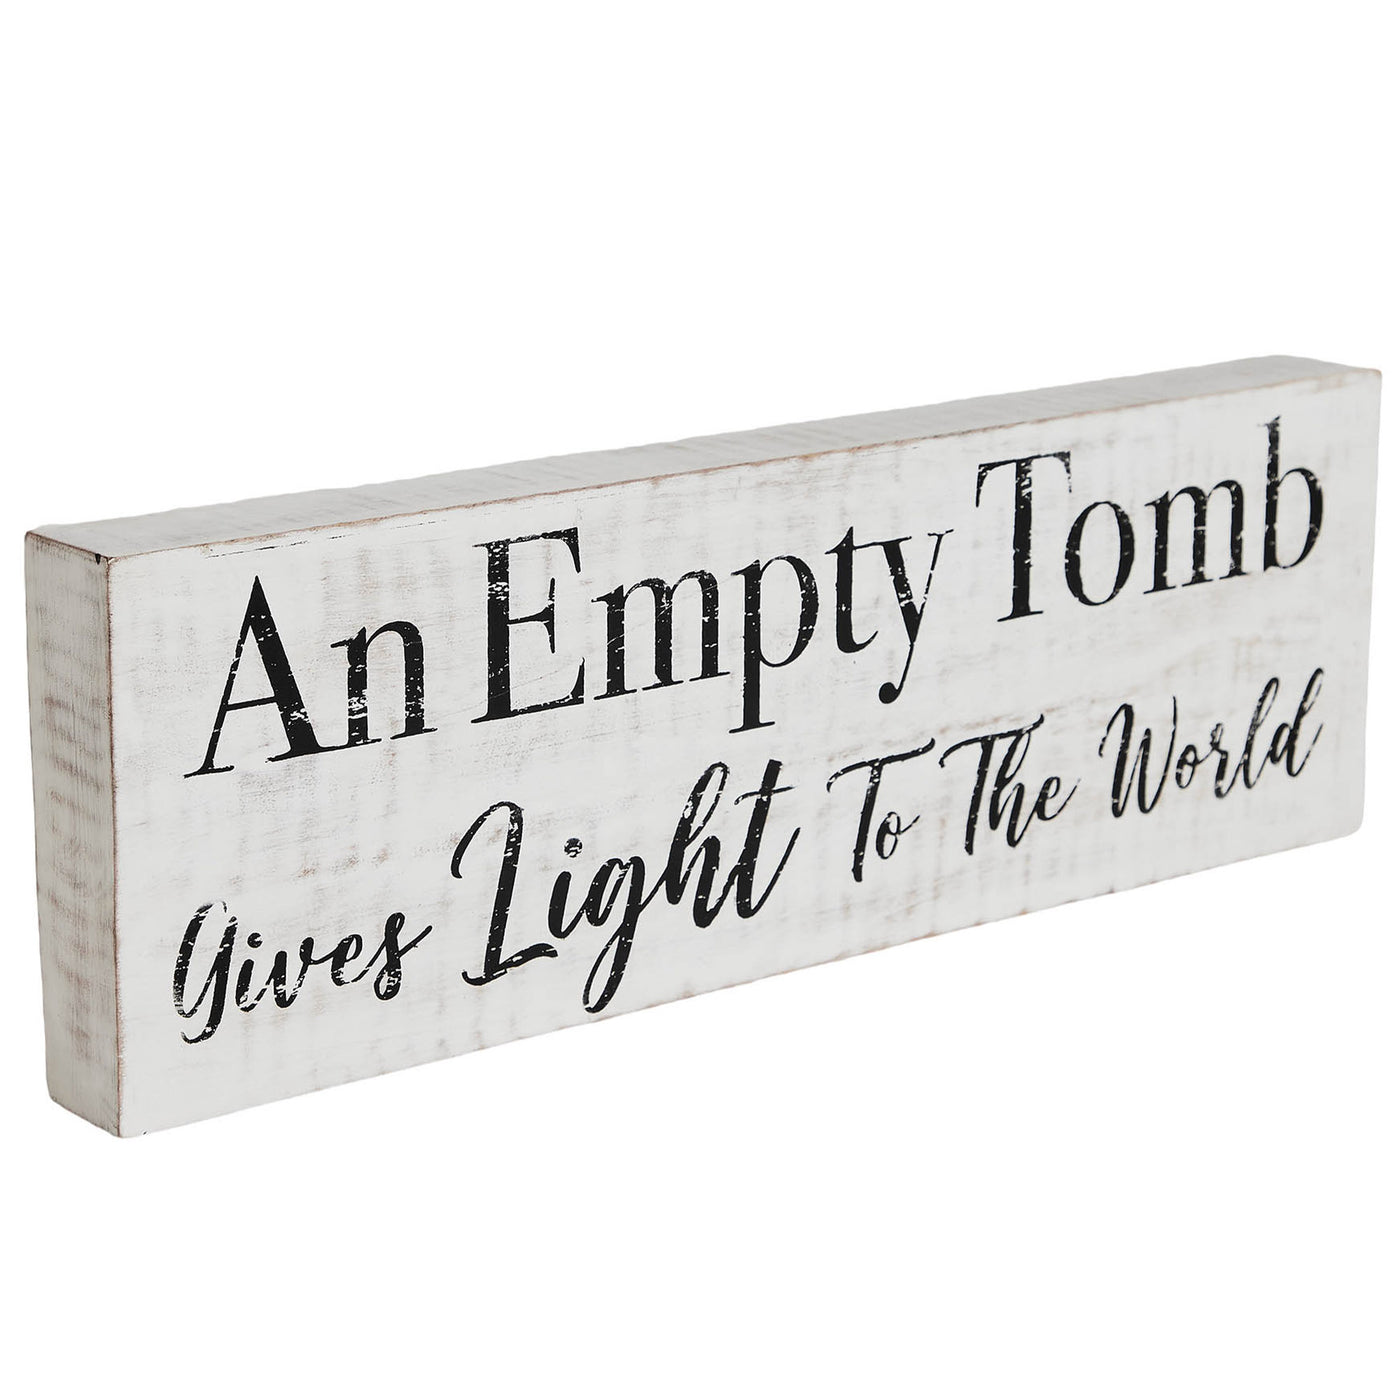 An Empty Tomb Gives Light to the World 15" Wooden Sign